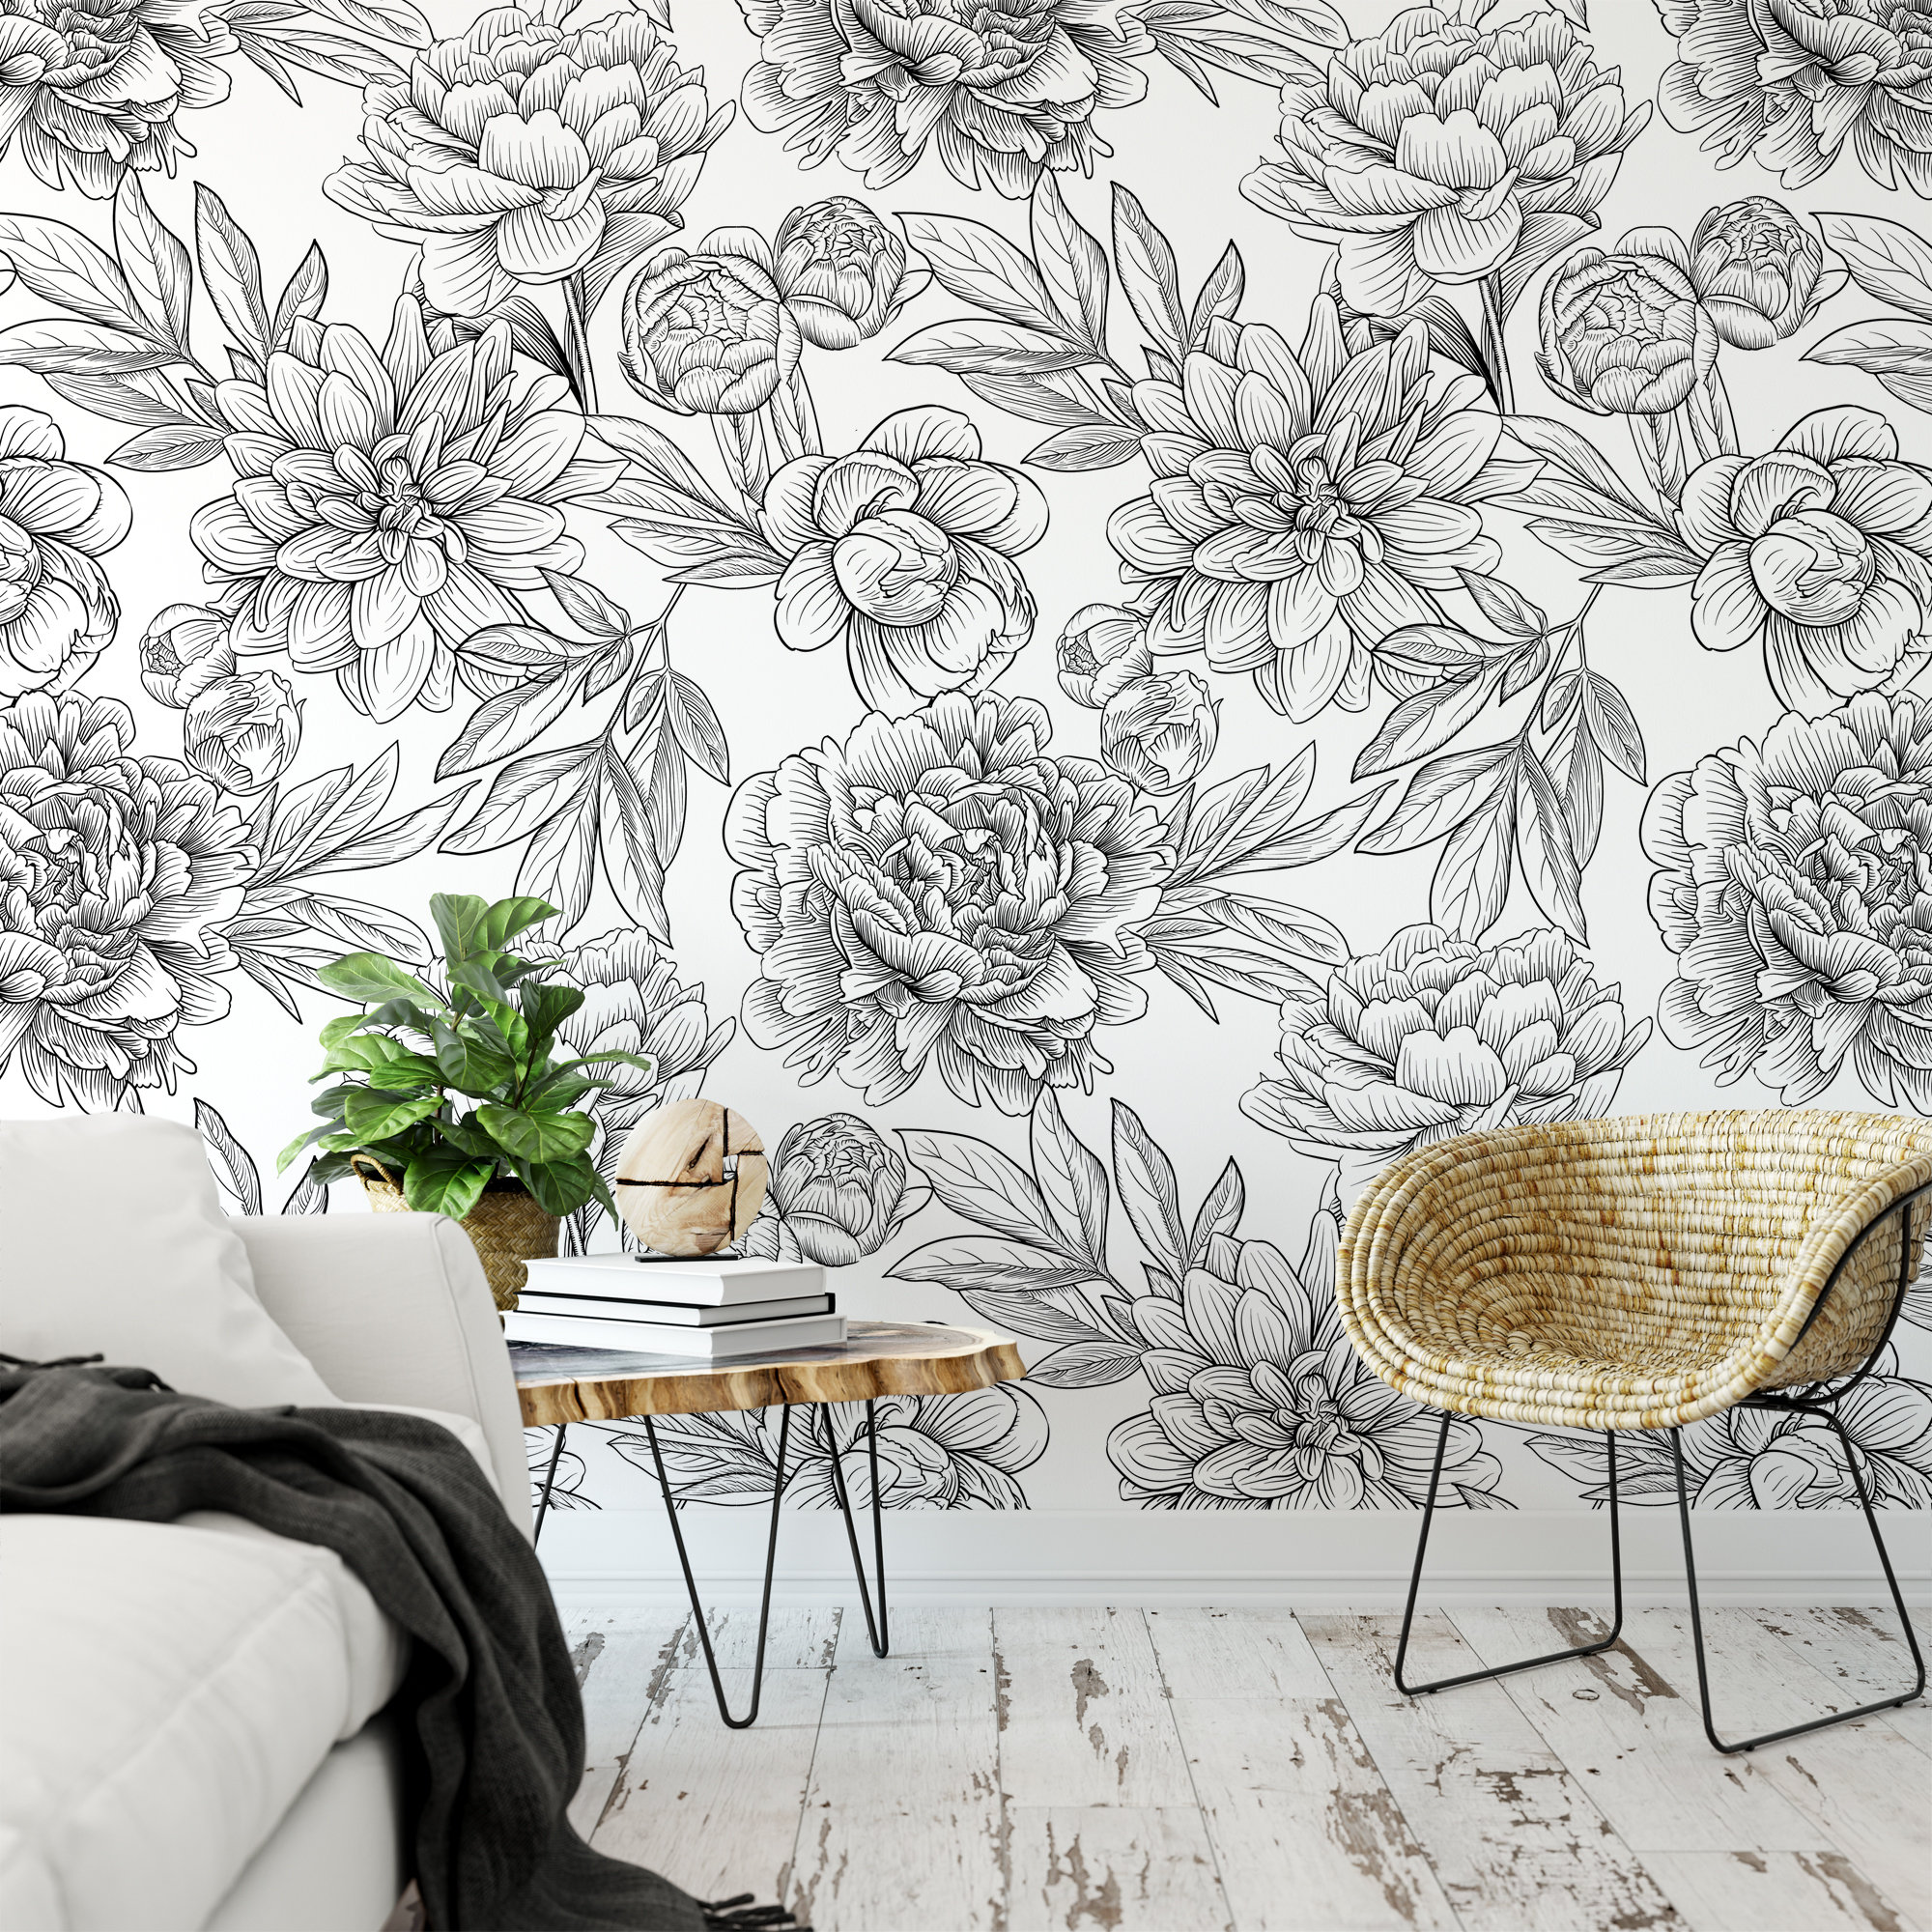 Black and White Peony Wallpaper Mural  On Sale  Bed Bath  Beyond   32617110